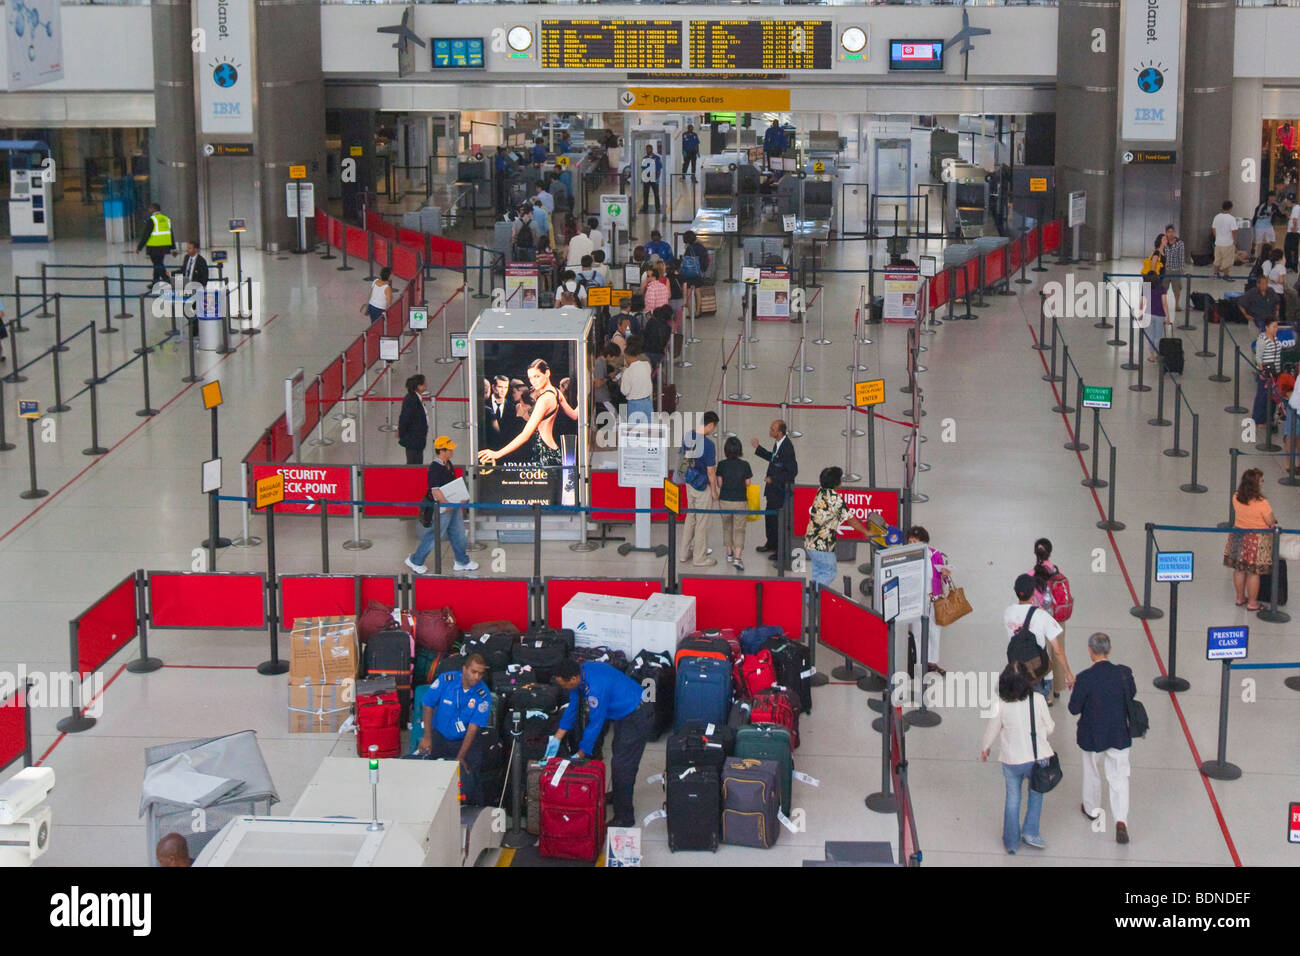 Security Checkpoint Inside JFK International Airport in New York Stock Photo